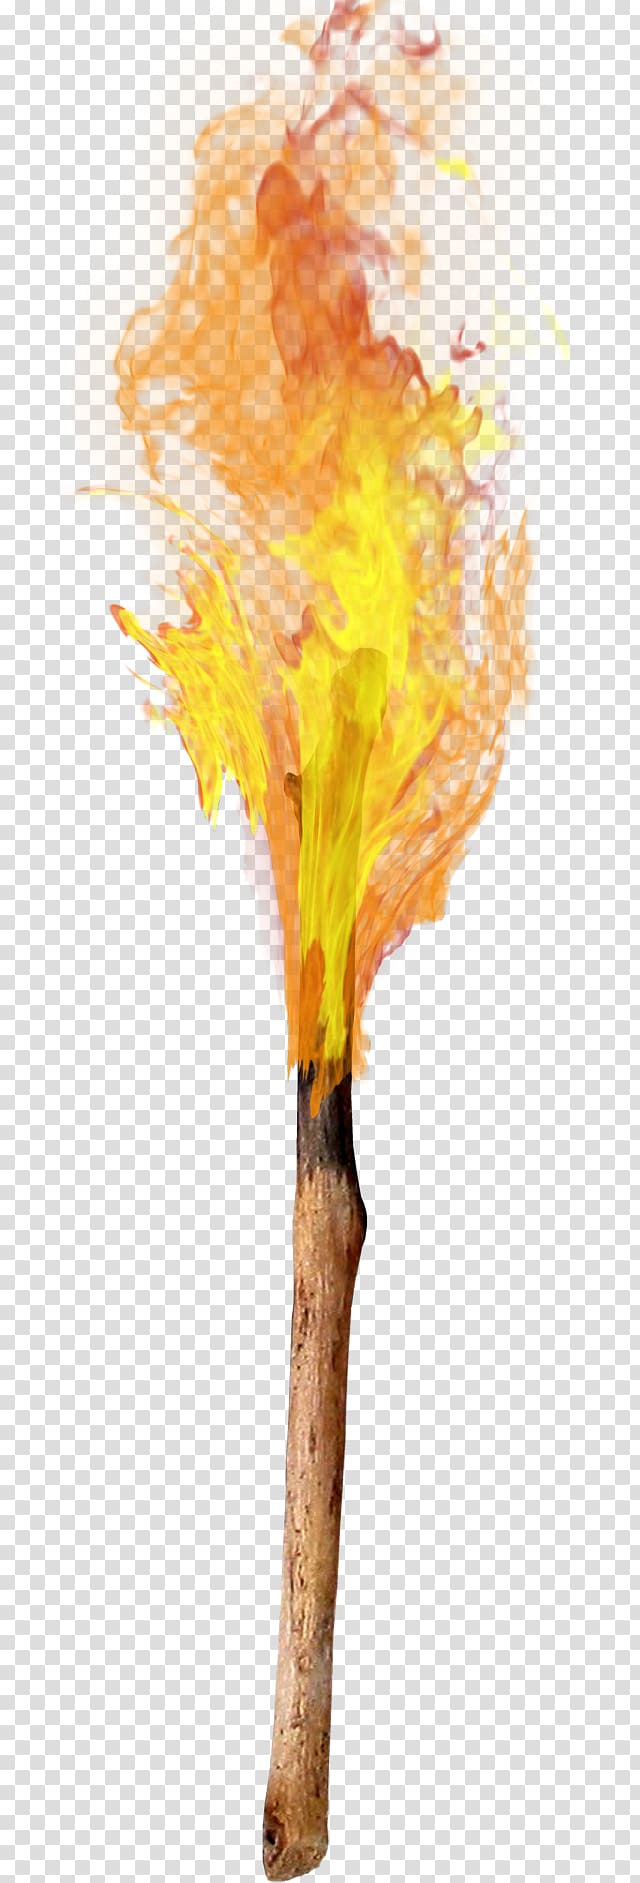 Torch Flame Combustion, flame transparent background PNG clipart